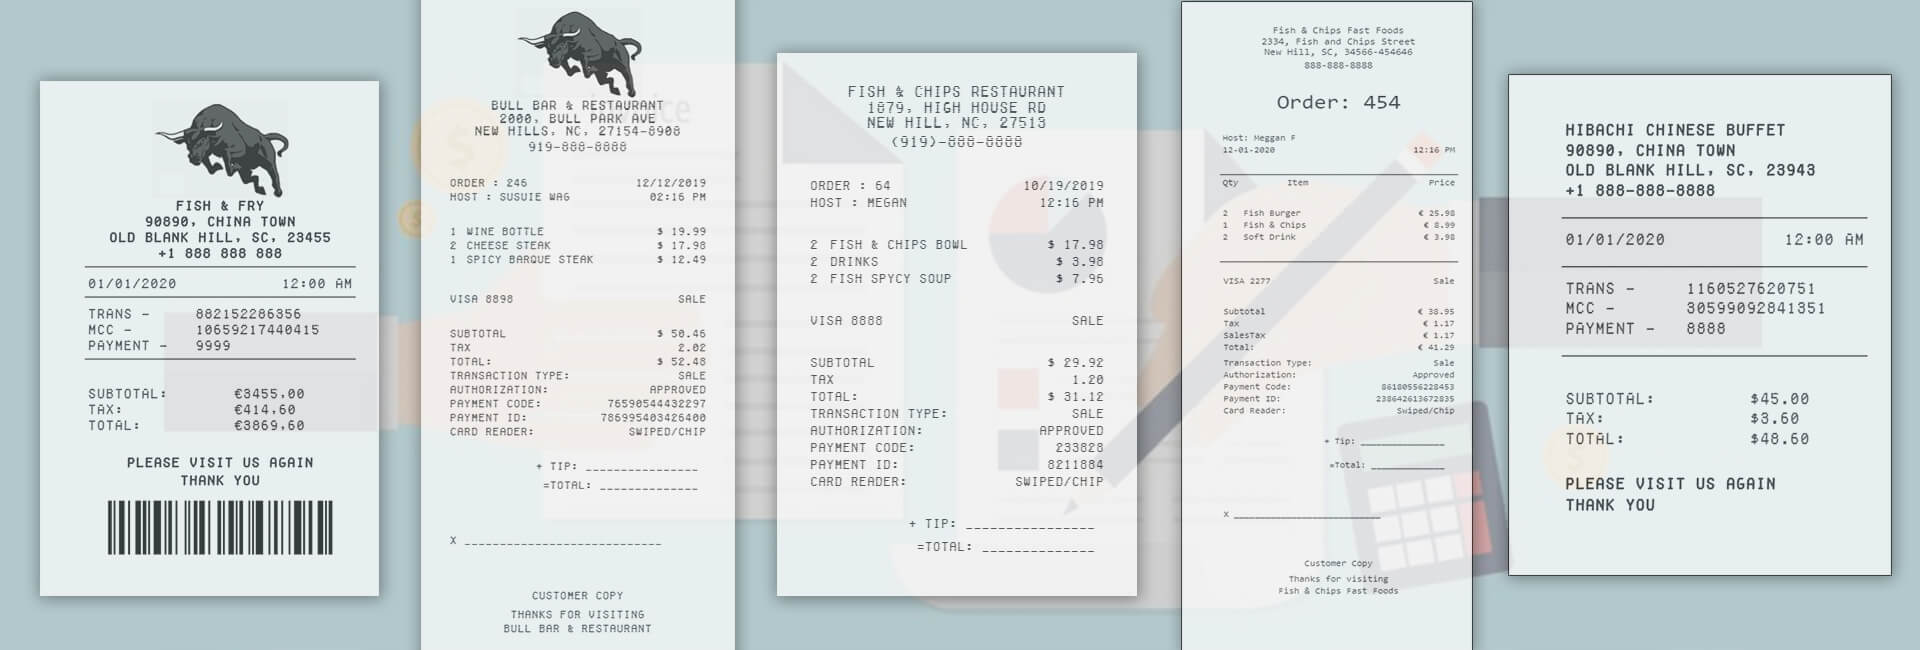 Provide the capability for How to make own food receipts using food receipt maker templates which comes with many different options and futures.